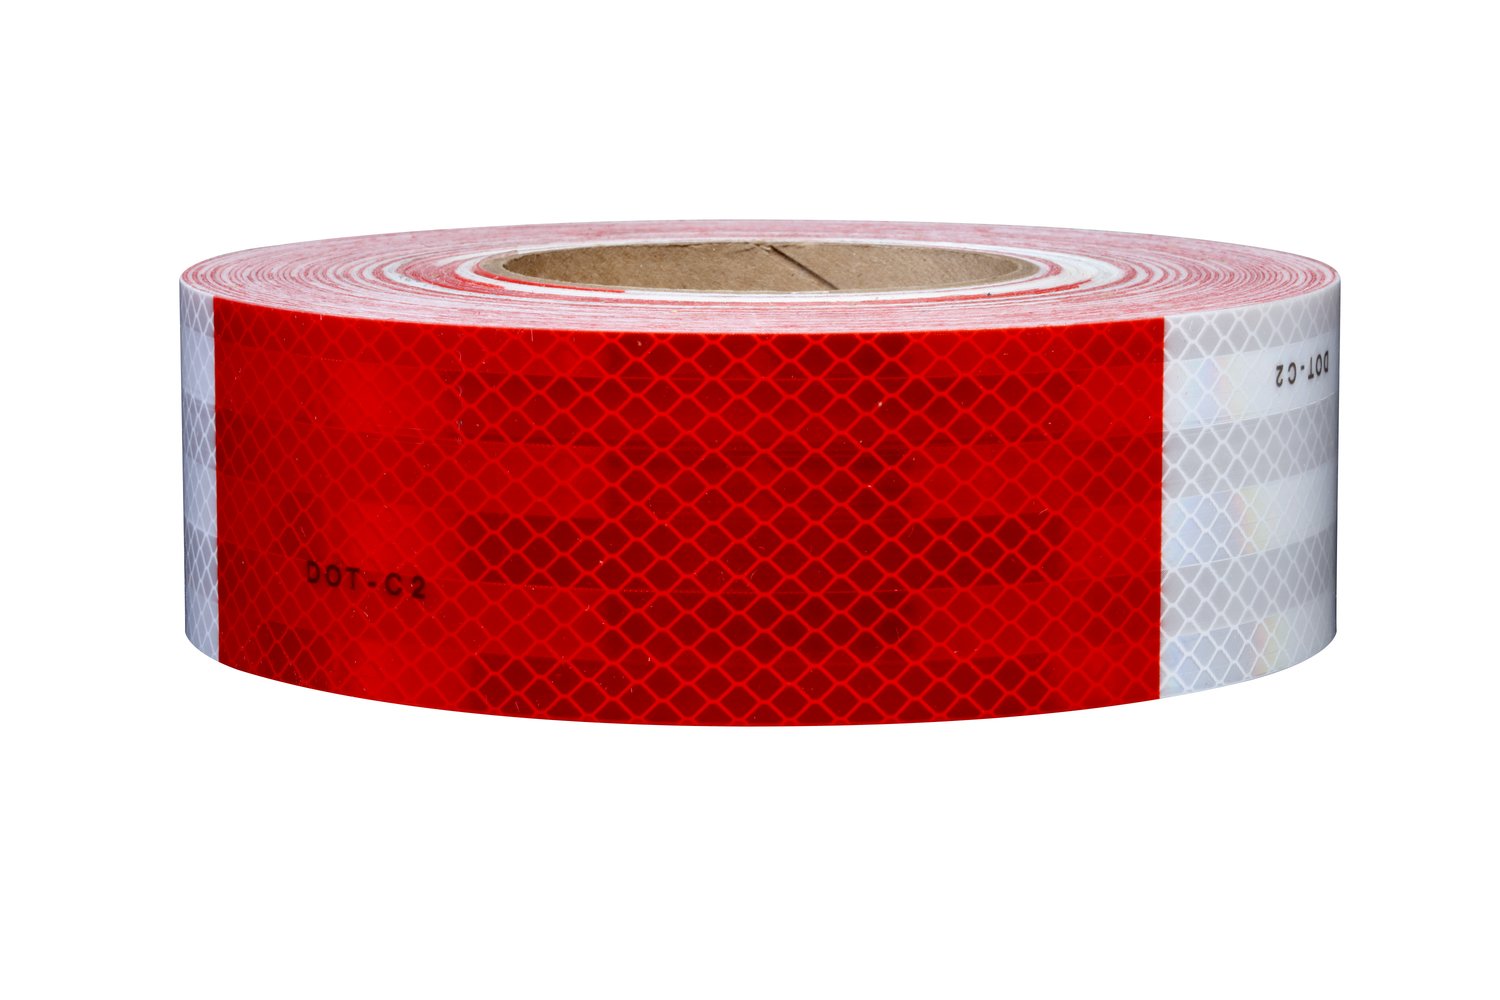 7010345612 - 3M Diamond Grade Conspicuity Markings 983-326 Red/White, Trinity Logo,
2 in x 50 yd, kiss-cut every 12 in